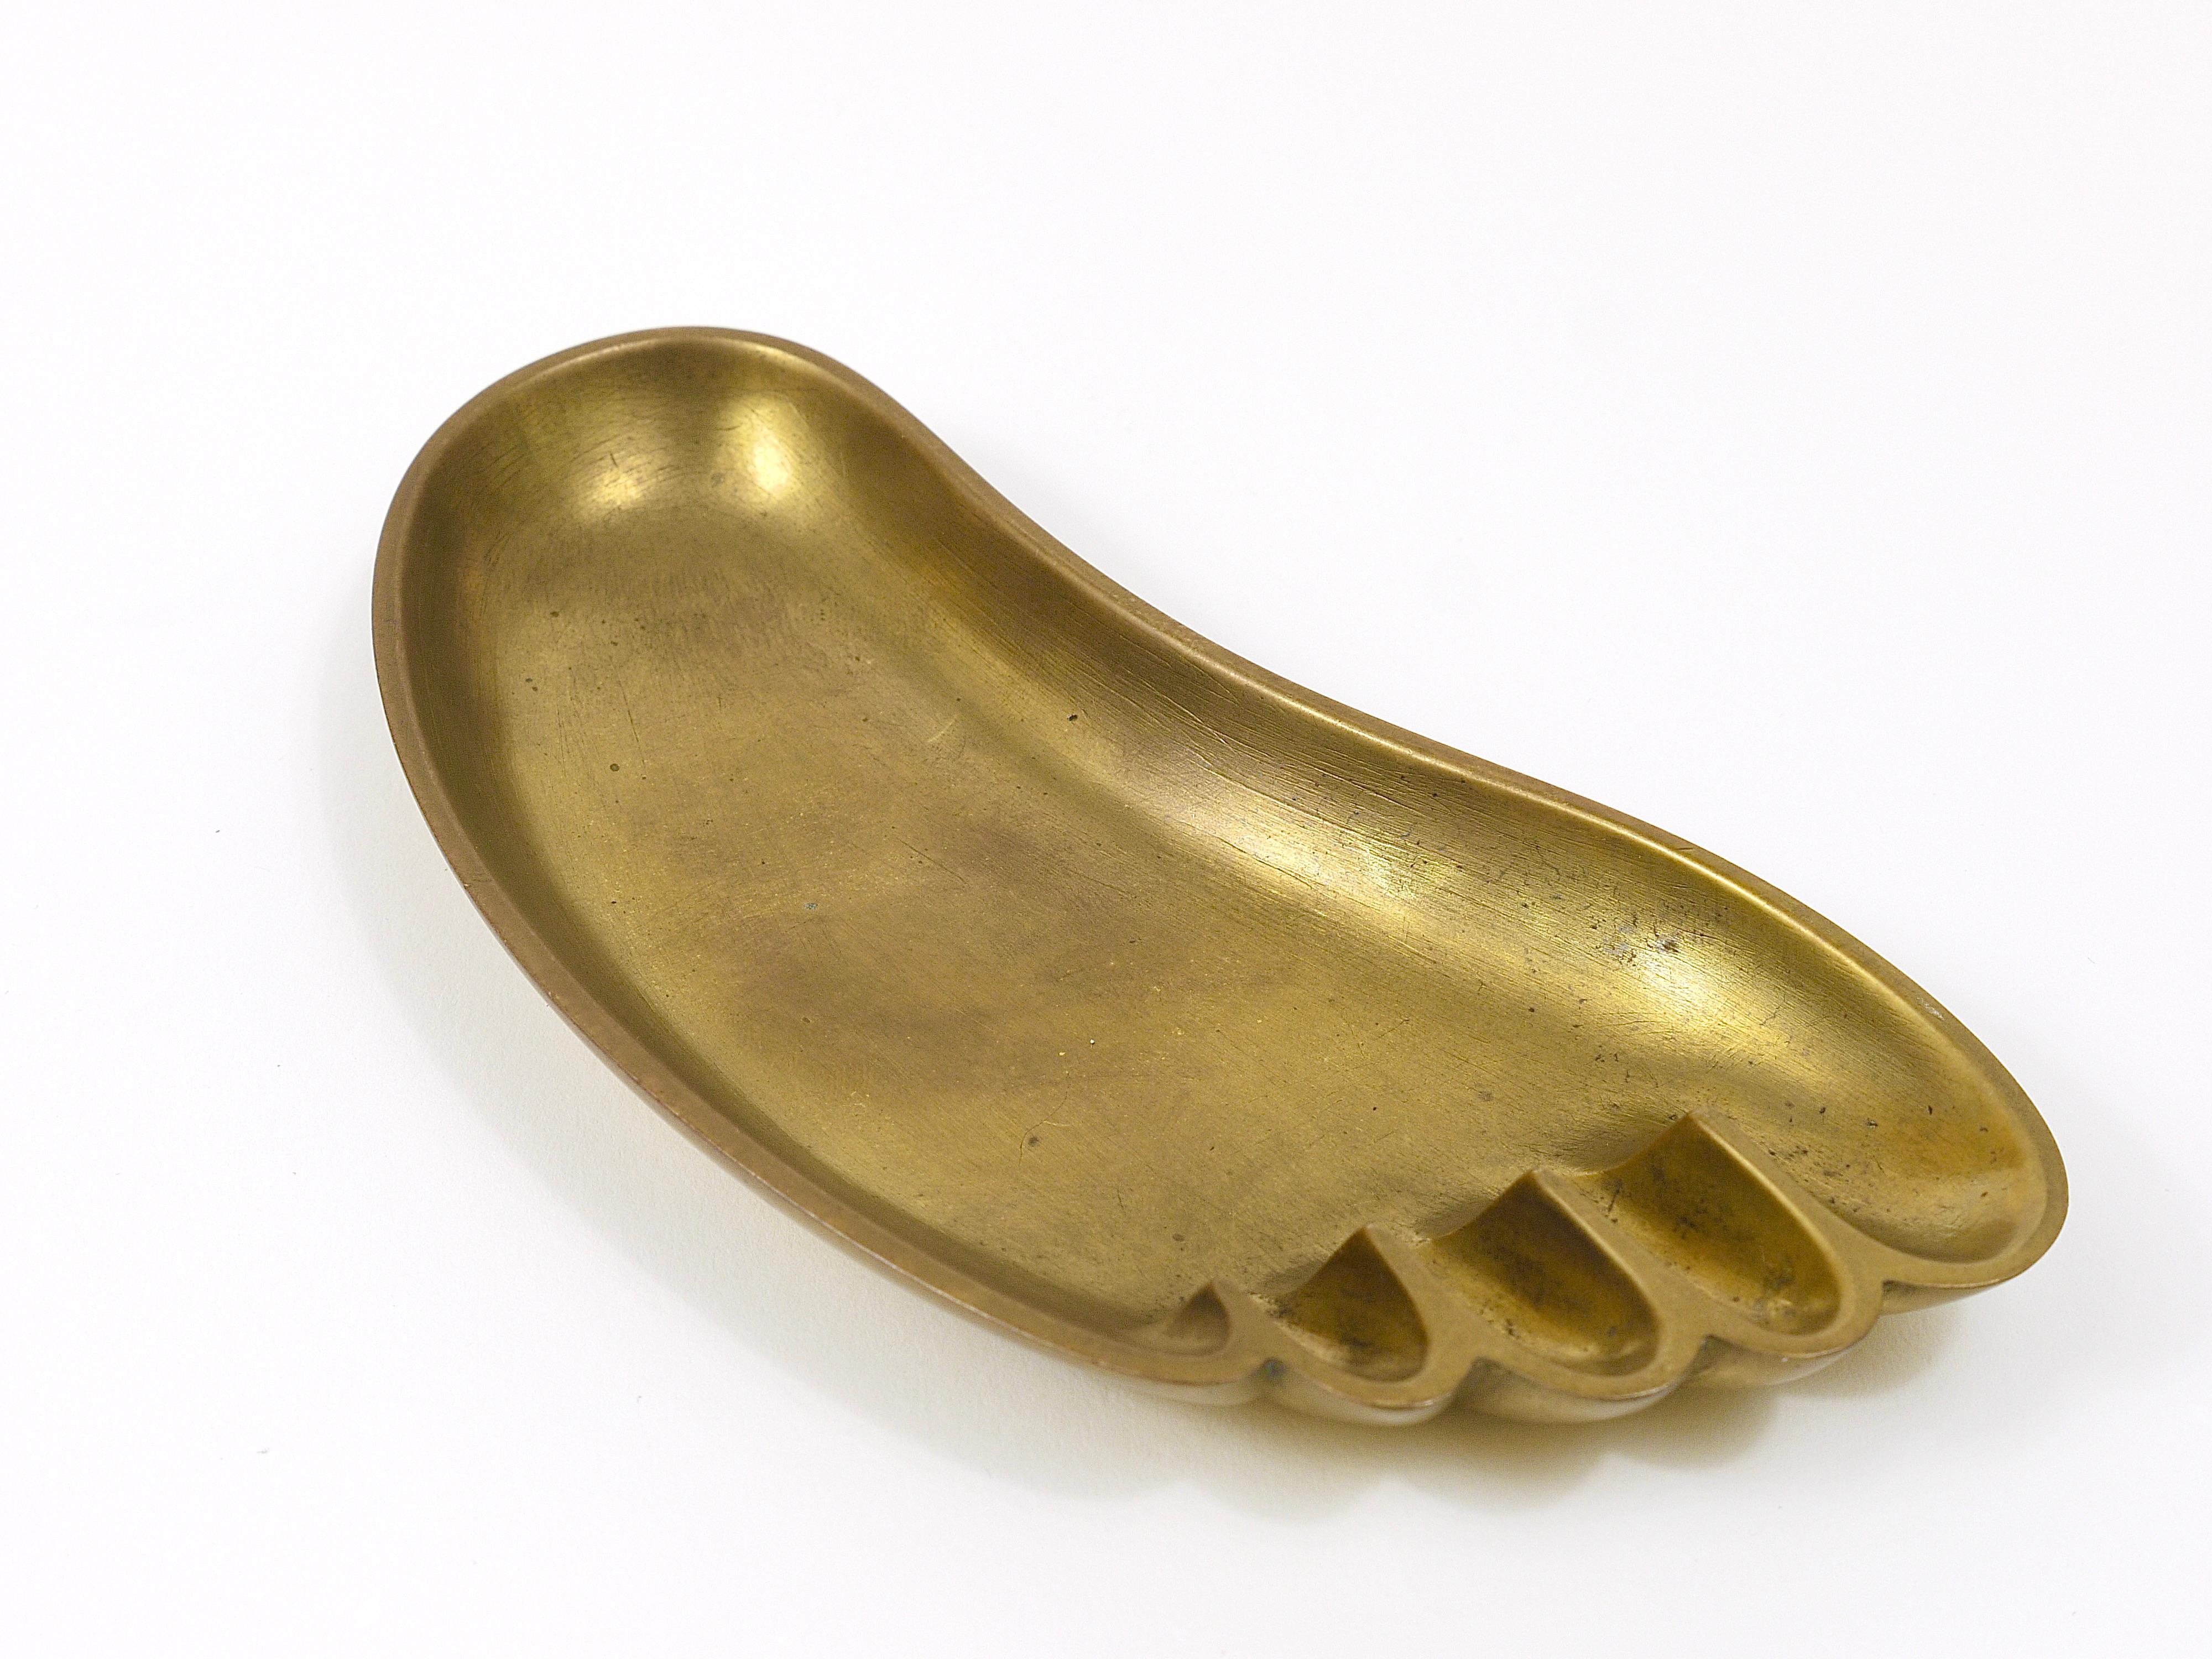 A charming and humorous Austrian brass bowl or tray in the shape of a foot, designed and executed by Werkstatte Hagenauer Vienna in the 1950s. also suitable as a jewelry bowl or „vide-poche“. Good condition, nice patina, marked on its bottom: Whw